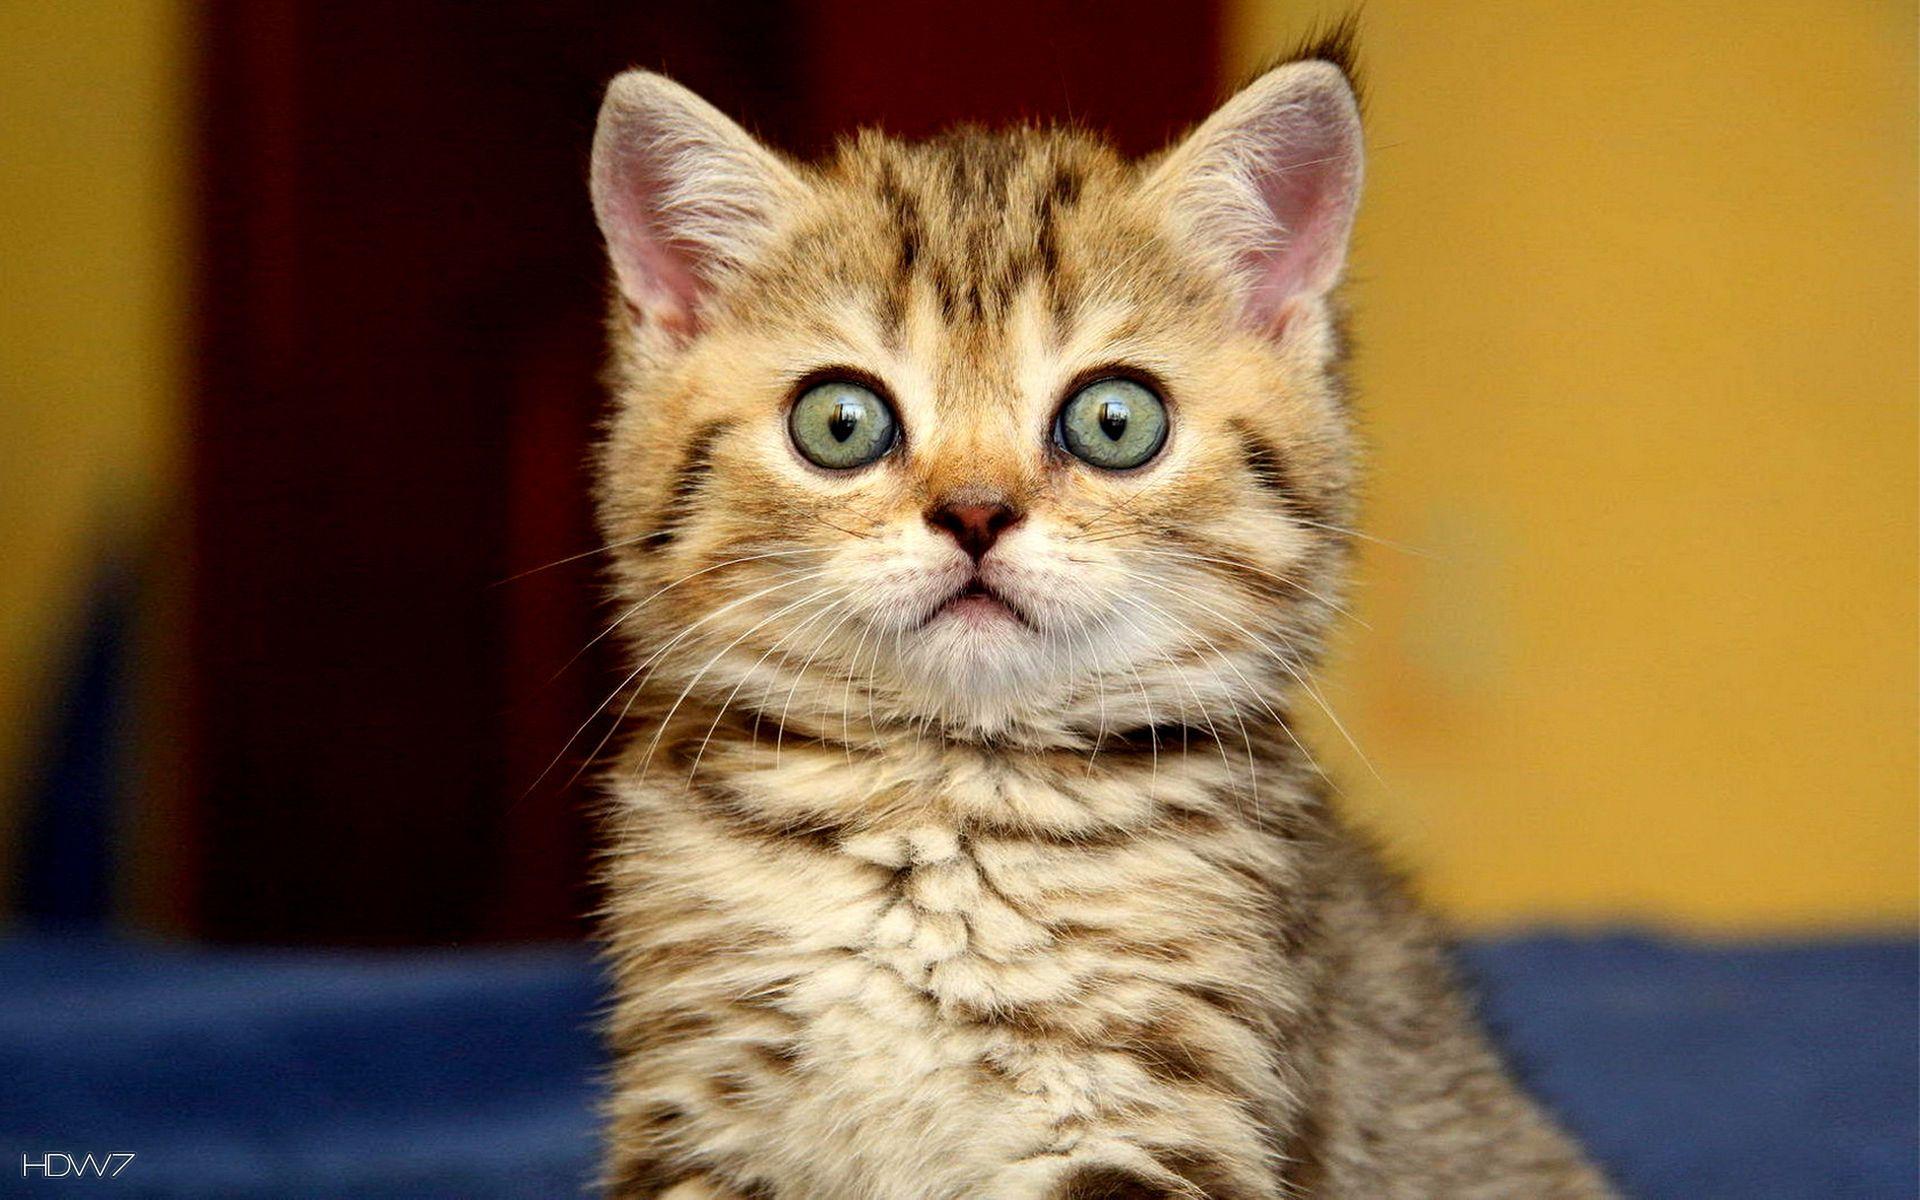 animals surprised cute kitty cat. Baby cats, Kittens cutest